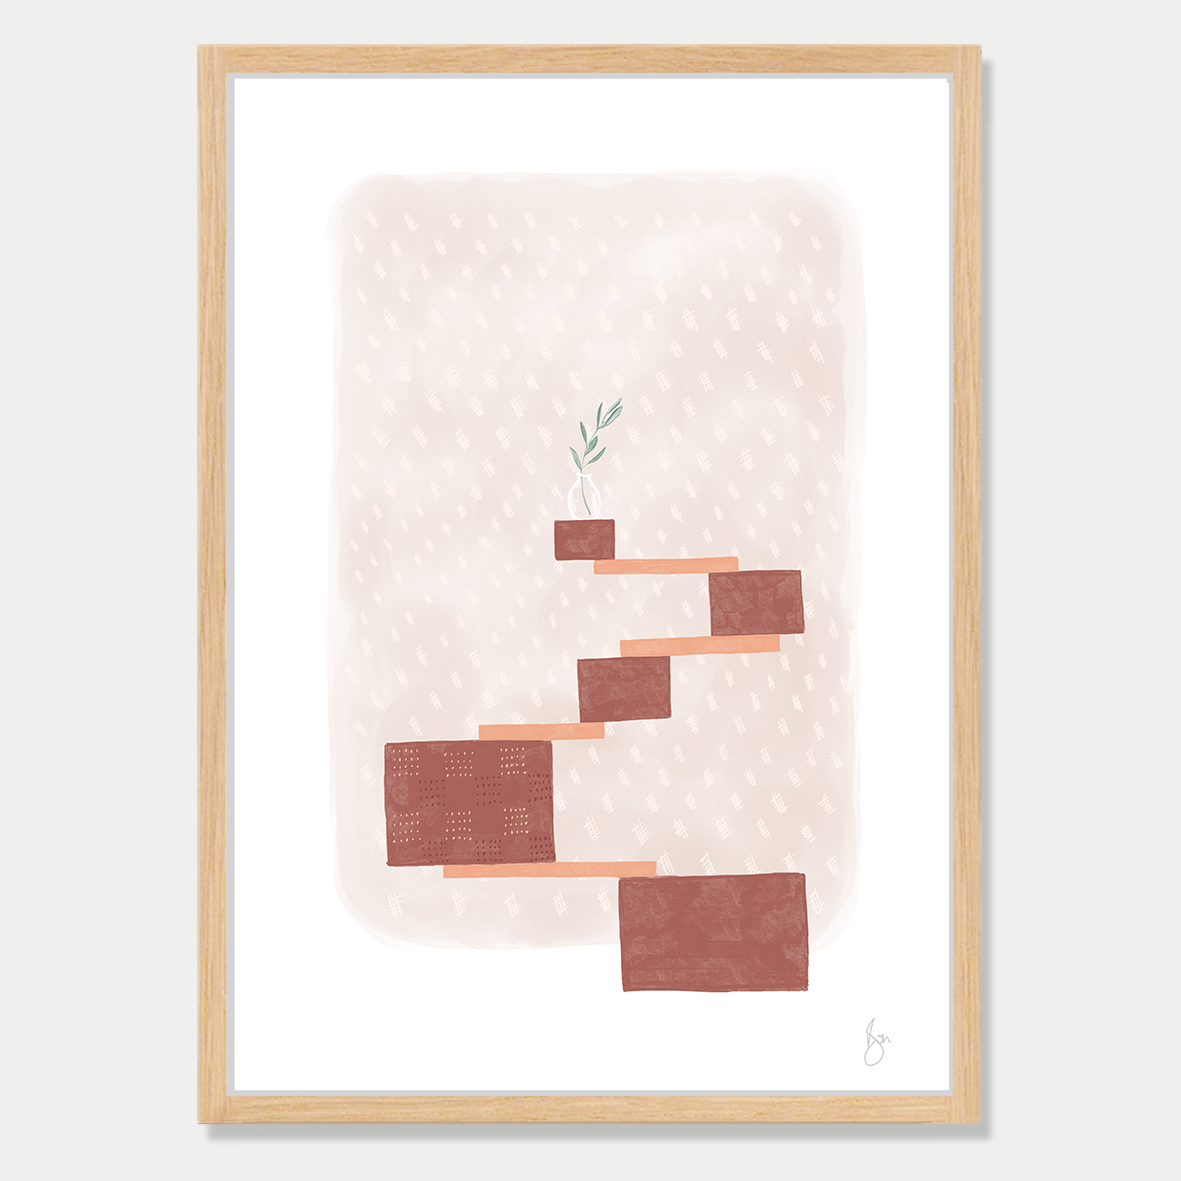 Art print of several blocks balancing with a olive branch in a vase sitting on top, in soft autumn colour palette by Bon Jung. Printed in New Zealand by endemicworld and framed in raw oak.